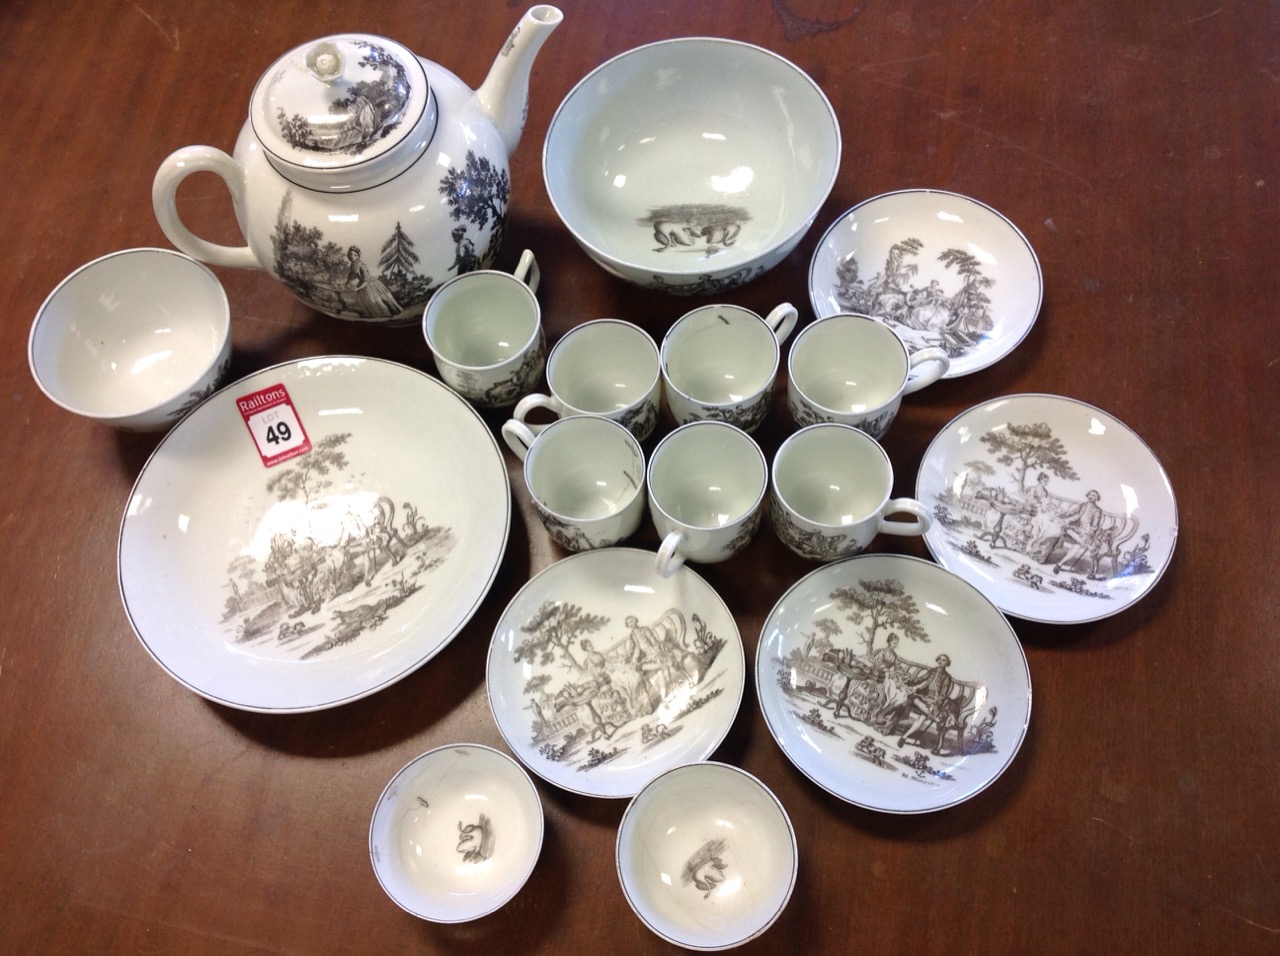 A nineteenth century Worcester monochrome Hancock printed teaset with teapot & cover, slop bowl,